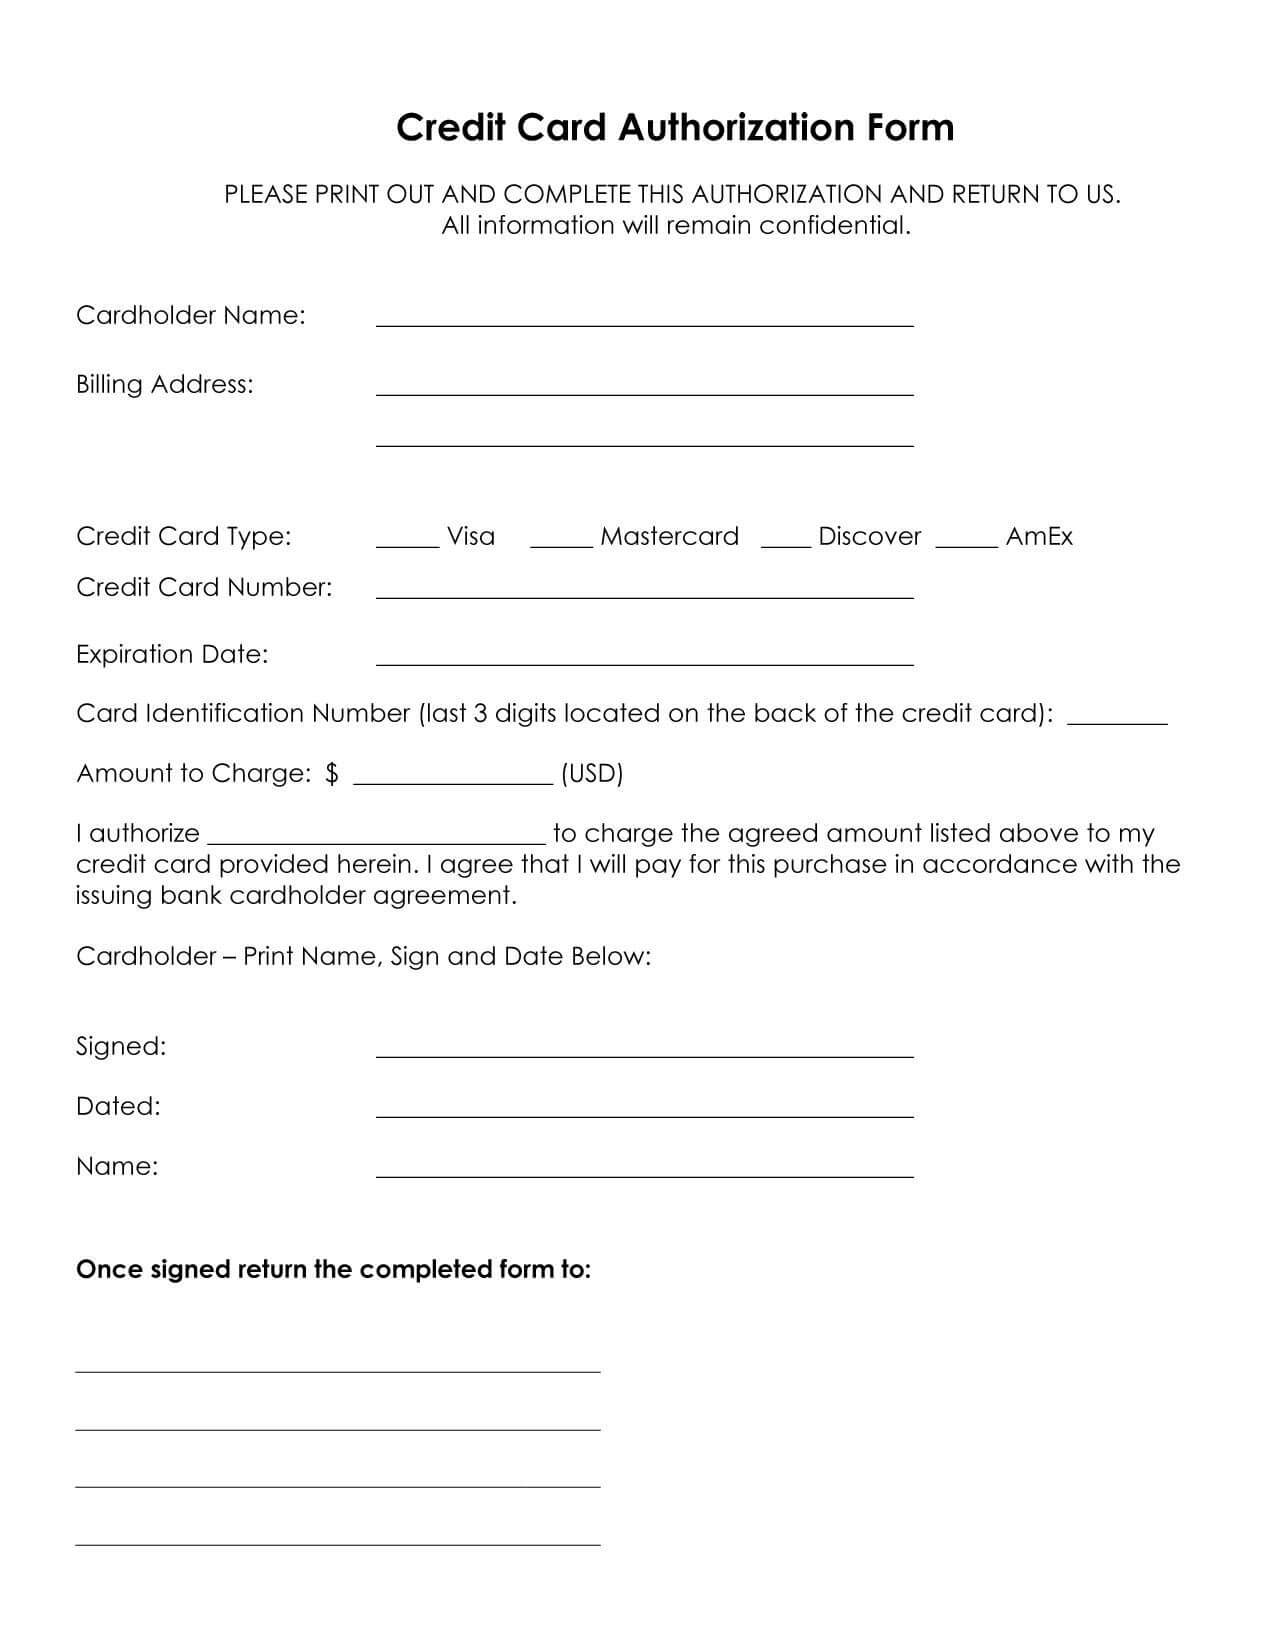 Credit Card Authorization Form Template In 2020 | Credit Within Credit Card Authorisation Form Template Australia